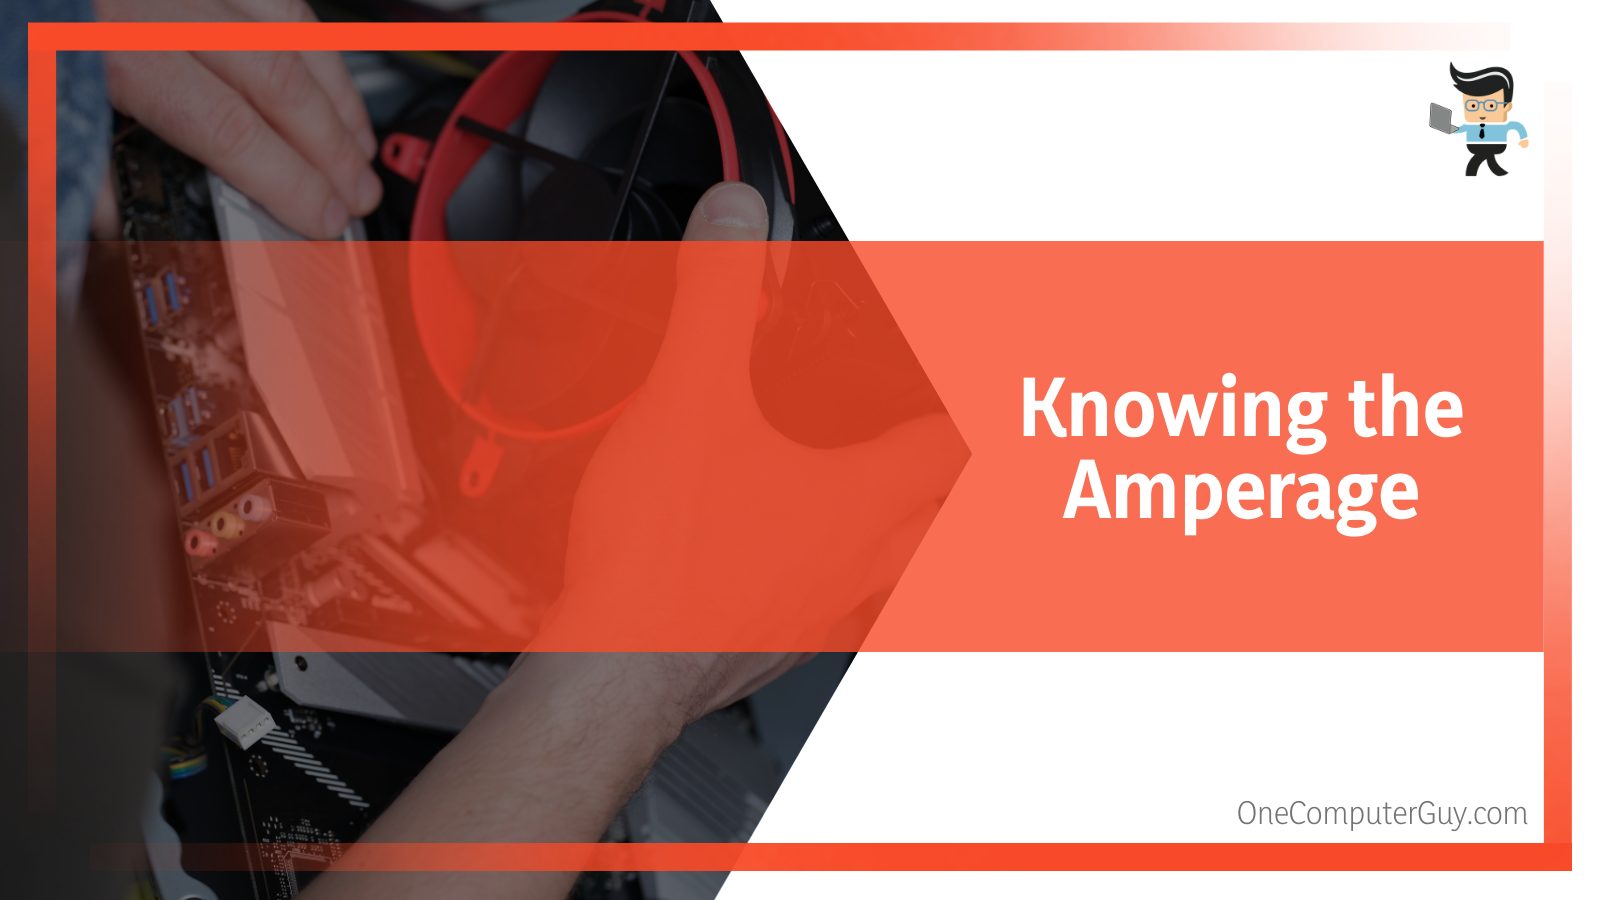 Knowing the Amperage